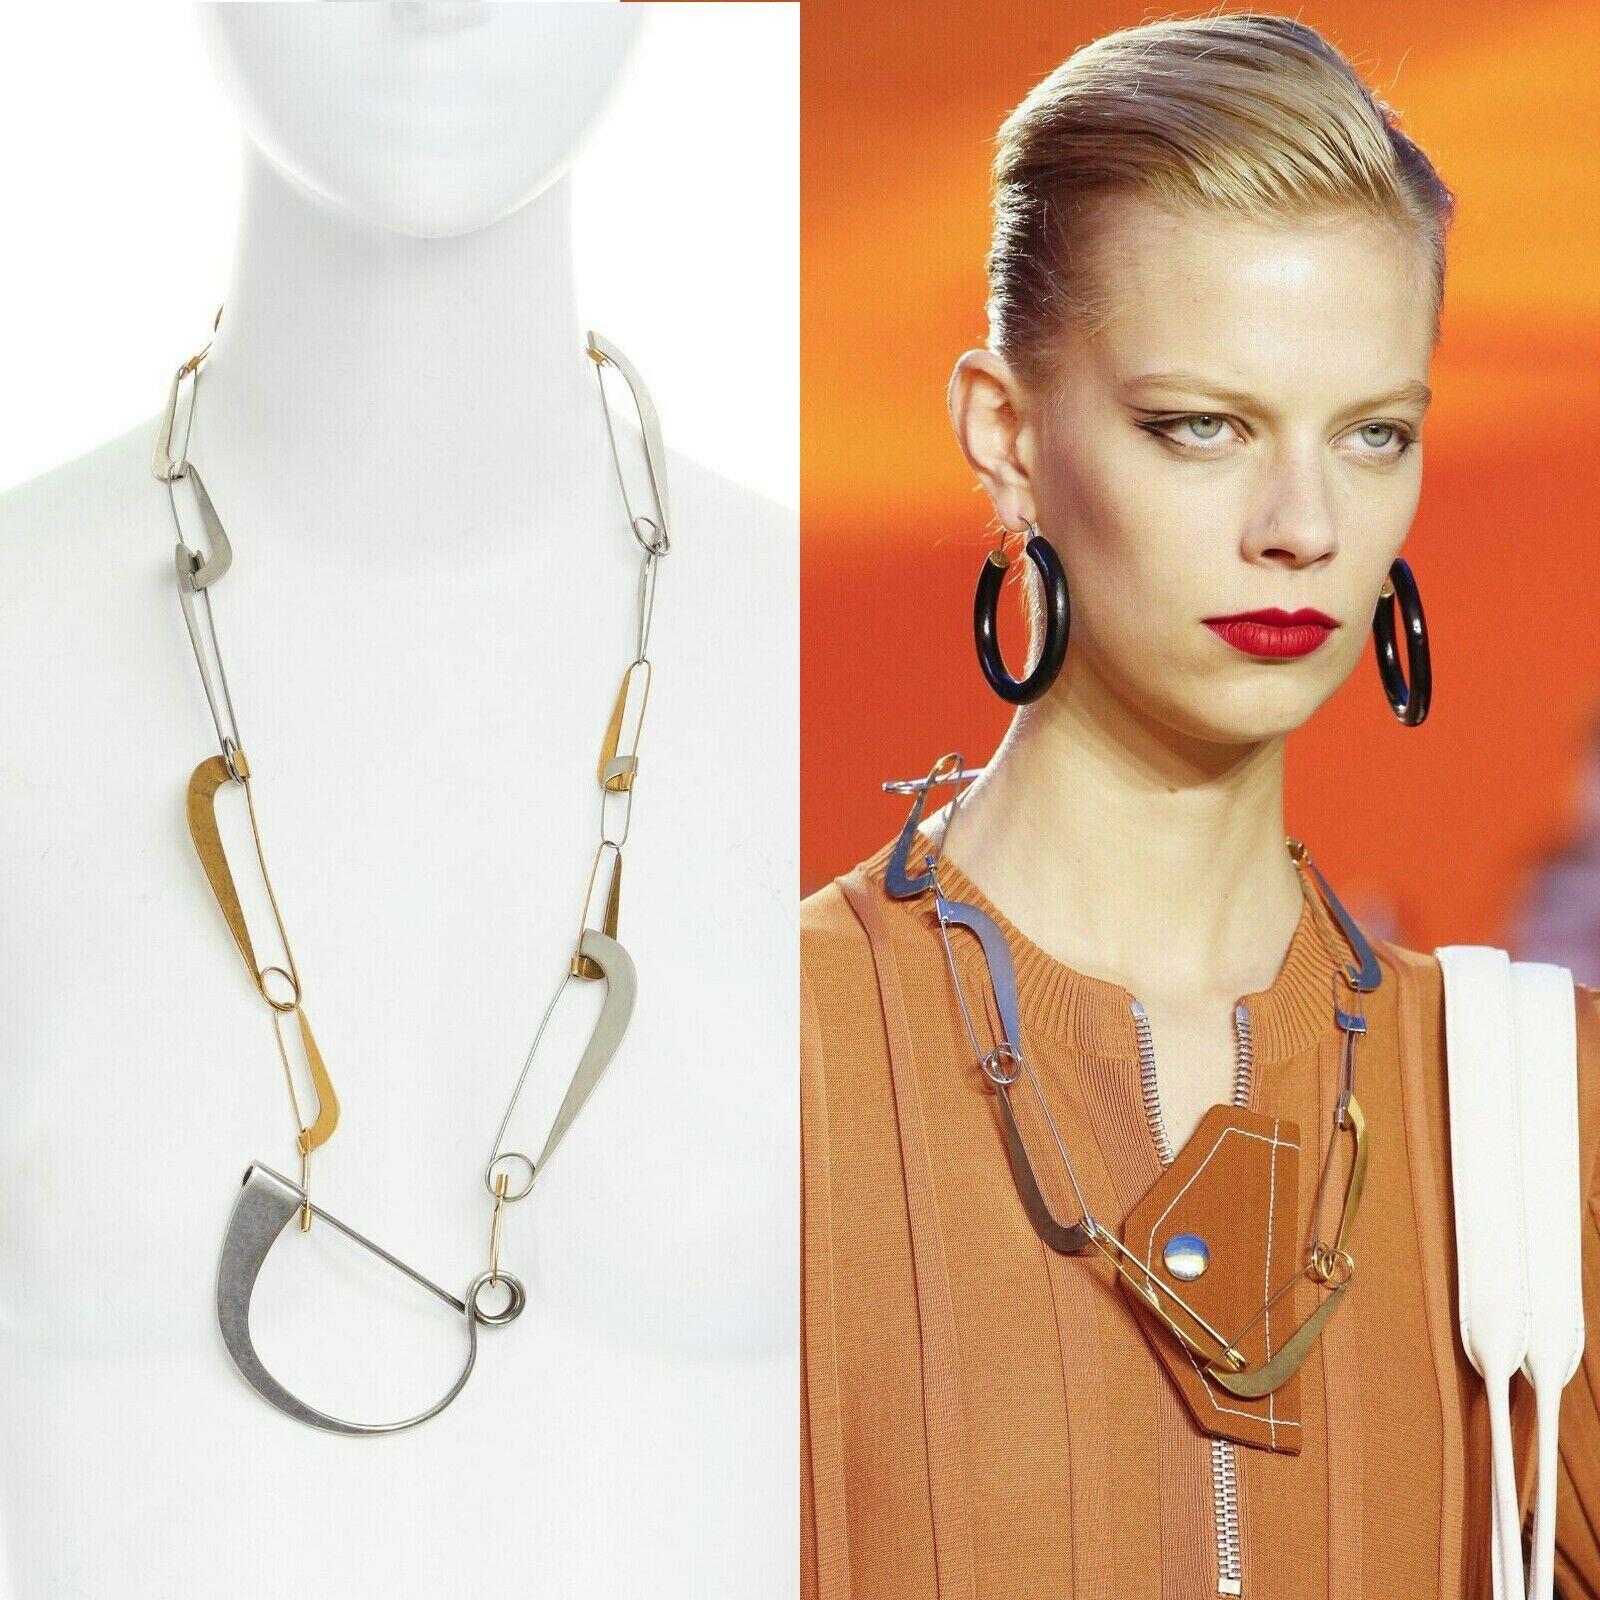 runway CELINE PHOEBE PHILO SS16 gold silver metal hardware linked necklace

CELINE BY PHOEBE PHILO
FROM THE SPRING SUMMER 2016 RUNWAY
Gold and silver-tone metal. Unpolished surface. Architectural safety pin design. Statement